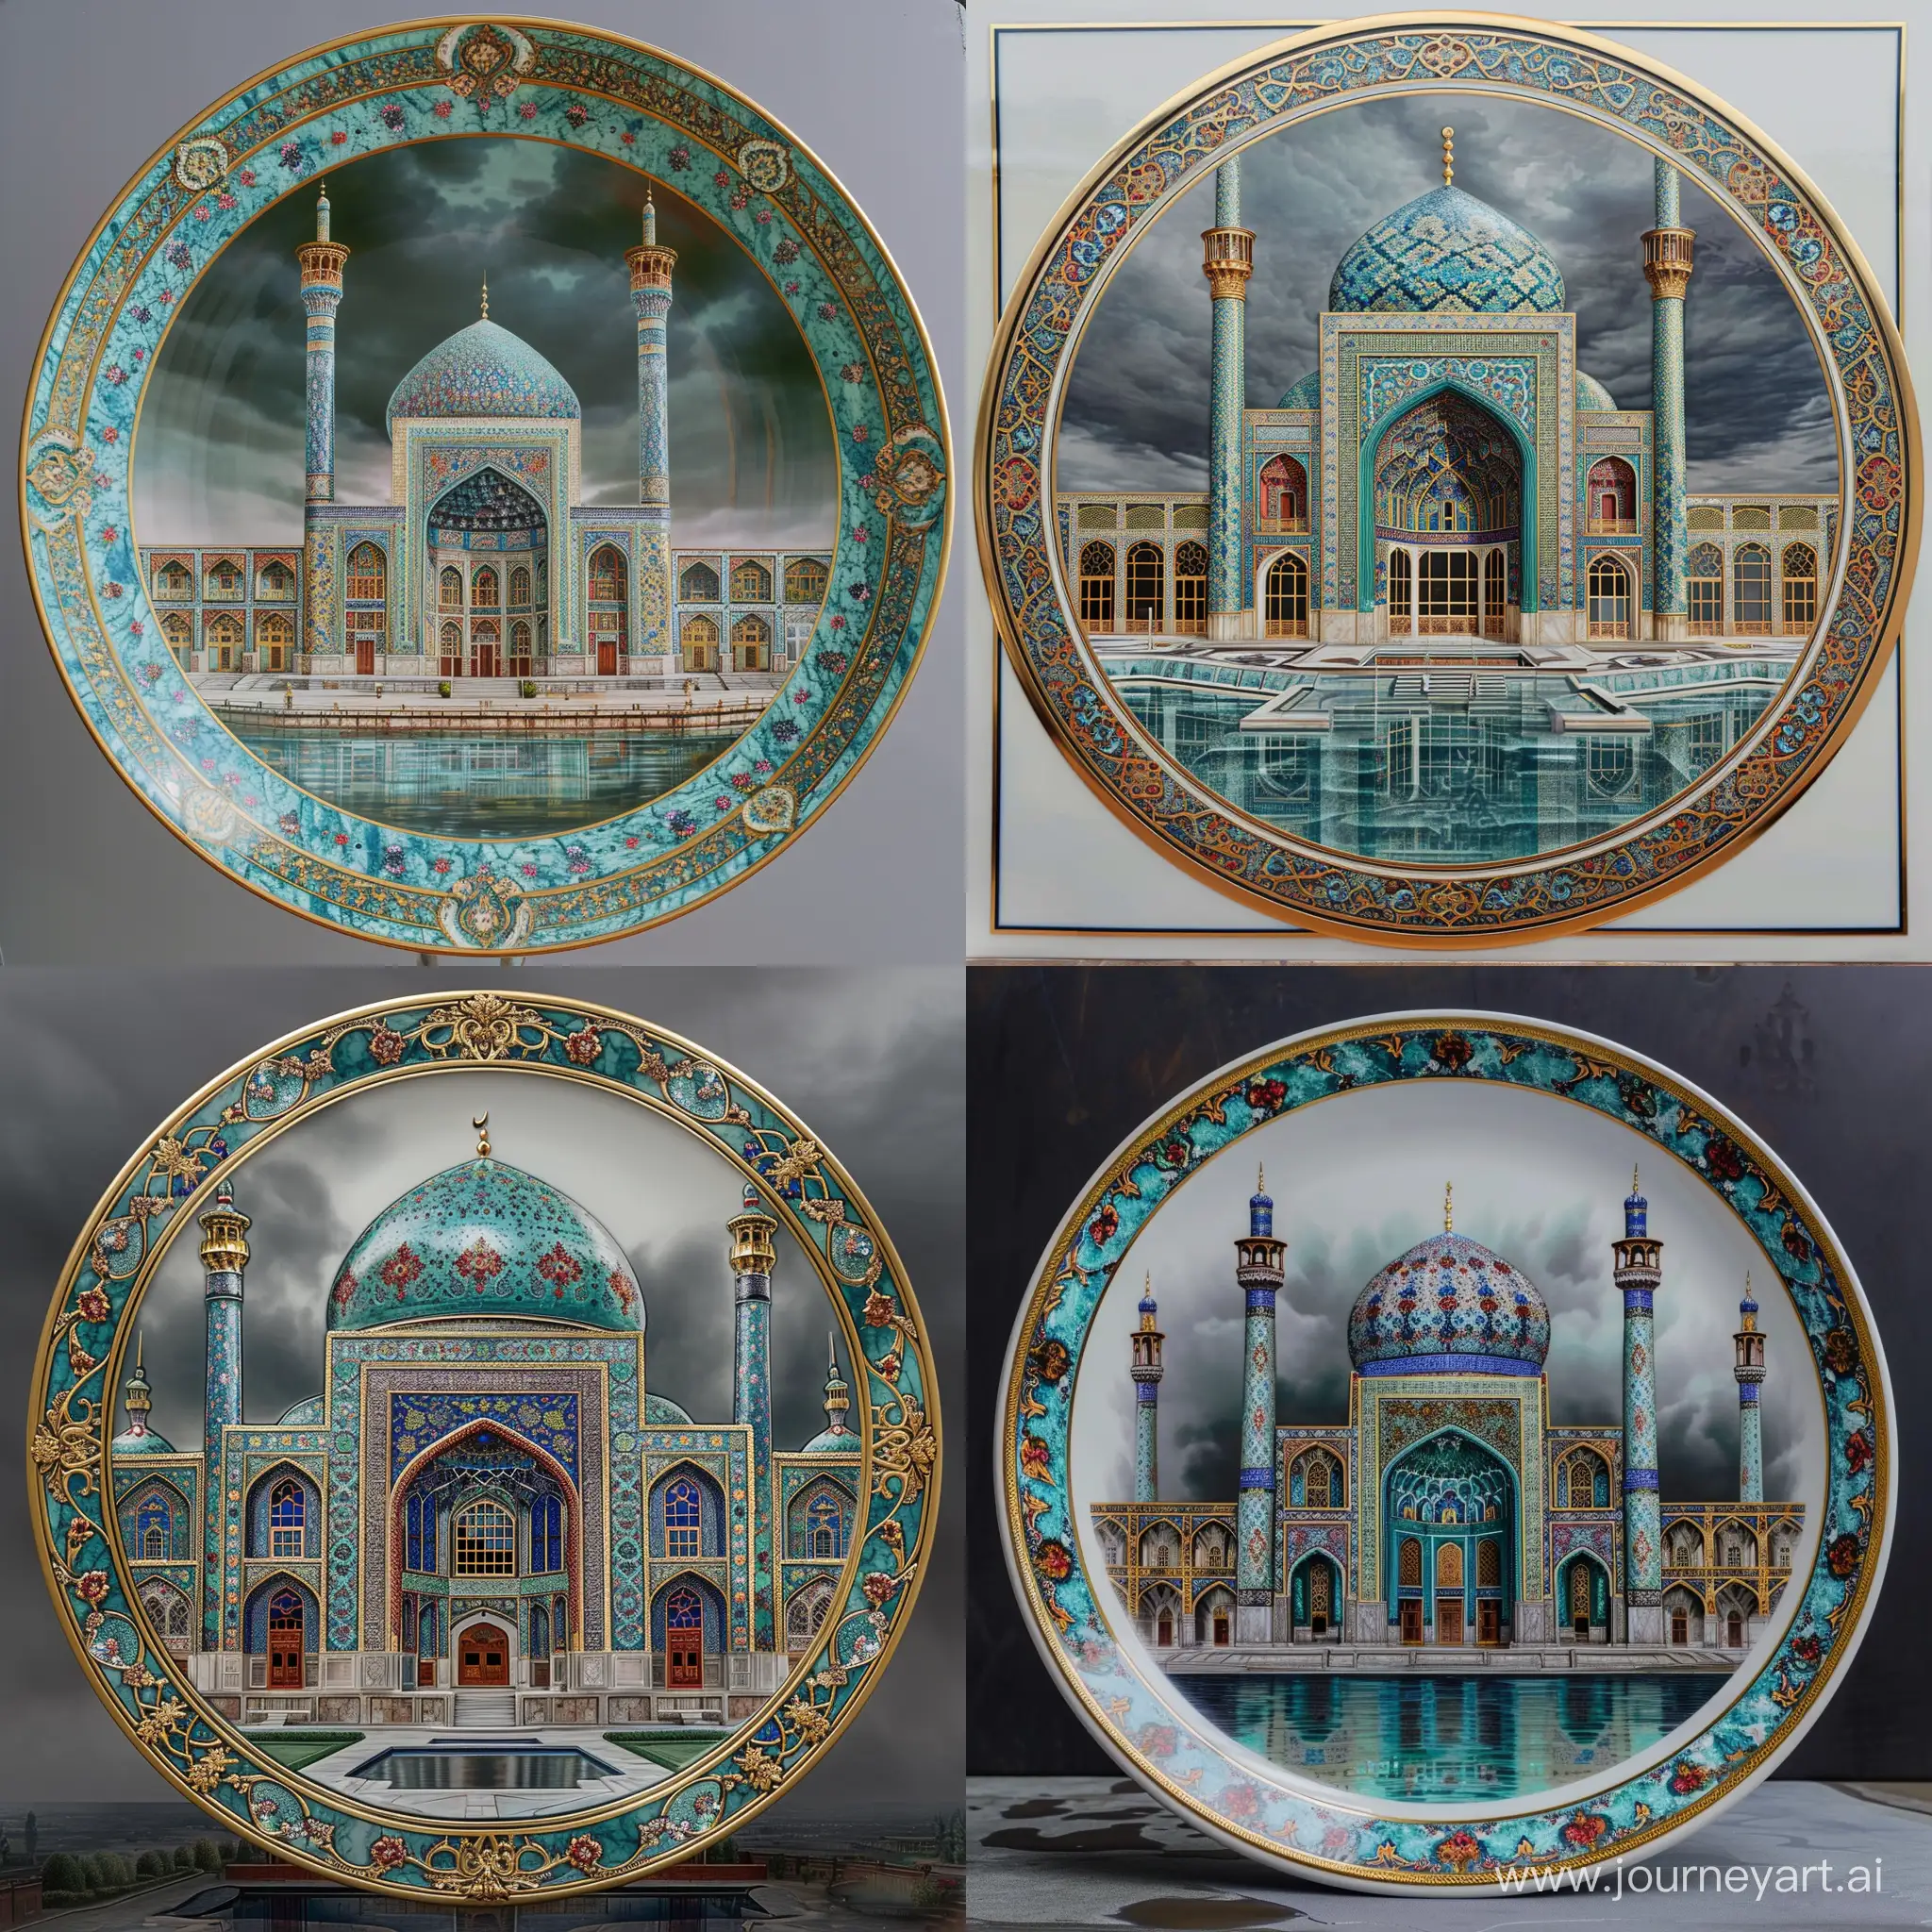 Embossed on a round porcelain with arabesque framed border, depicting an Isfahan Emam mosque, tall modern turquoise marbled iwan having finely thin blue red green floral persian tile motifs, glass windows, enormous shiny gold metals linings on edges and outlines of mosque, thick metallic gold on edges of mosques, gold framed panels, thin decorative minaret spires, front view, full view, beyond a water pool, dark grey sky weather,  --v 6